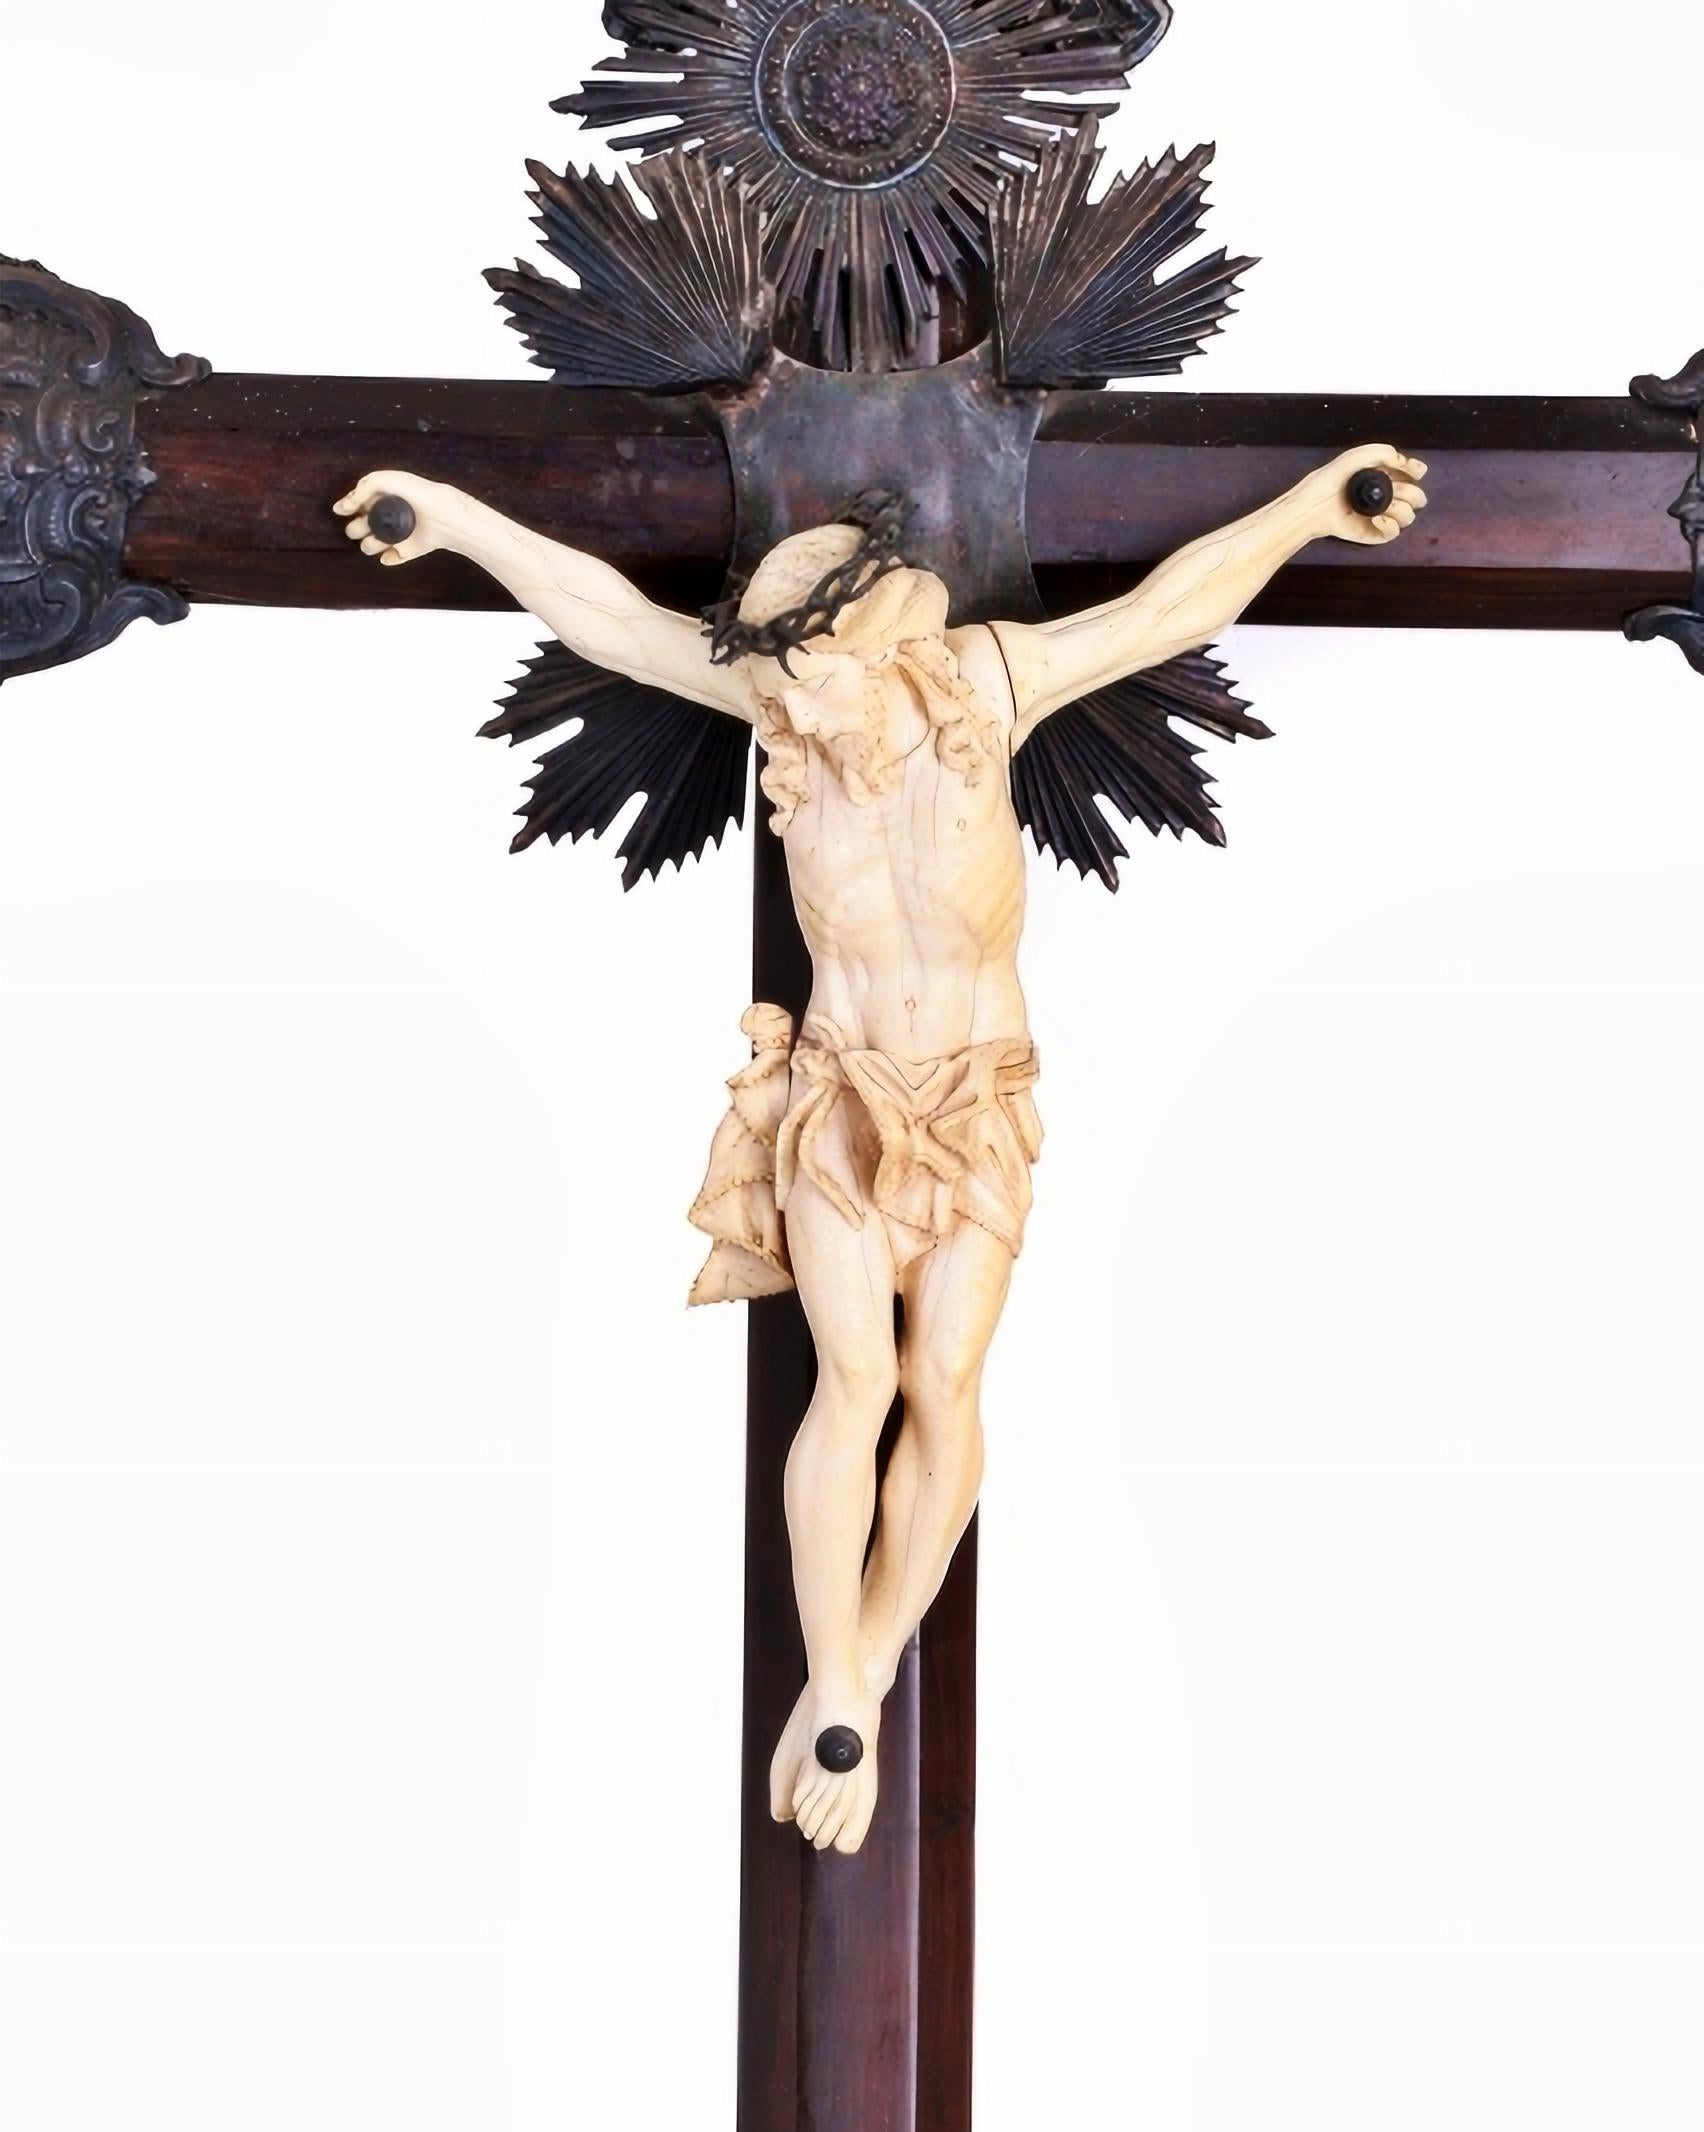 JESUS CRISTO CRUCIFICADO
Indo-Portuguese sculpture from the 18th century
in ivor... Cross in carved rosewood and base in gilded wood. The figure is represented dead, with cendal draped around the waist. Resplendors, plates, crown, terminals and